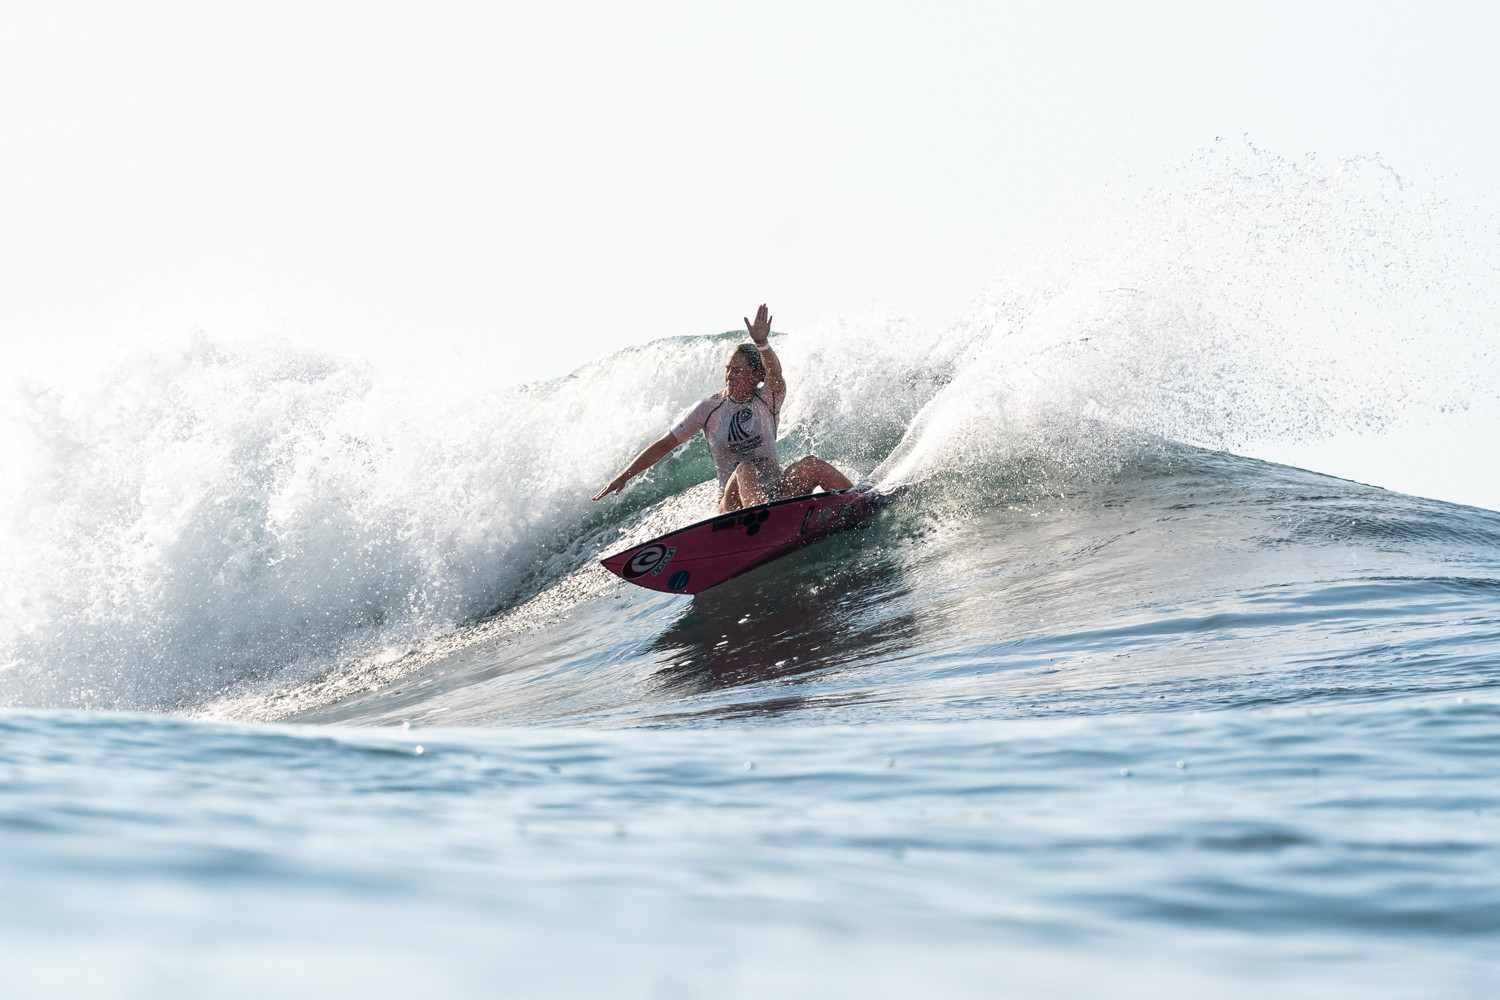 Alyssa Spencer of the United States in action on the final day of the World Surfing Games ©ISA/Sean Evans